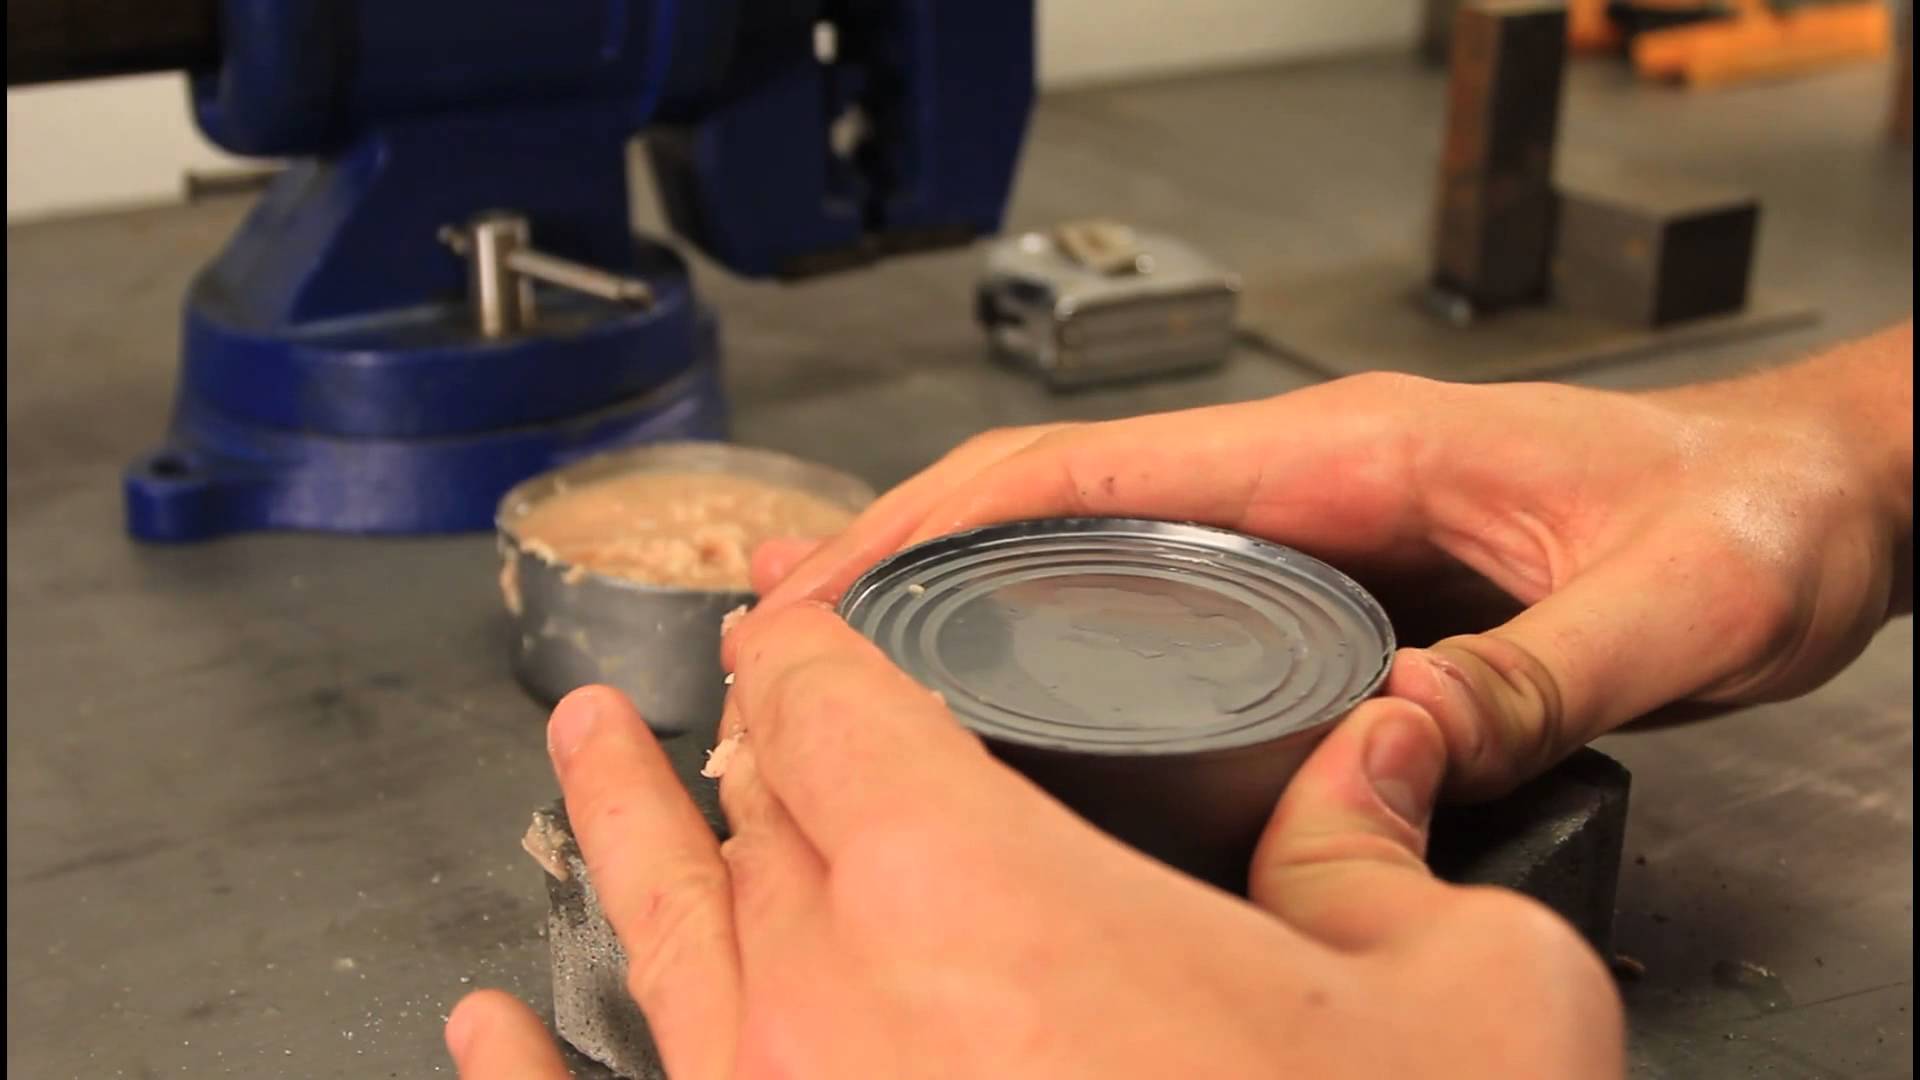 How to Open a Can without Can Opener